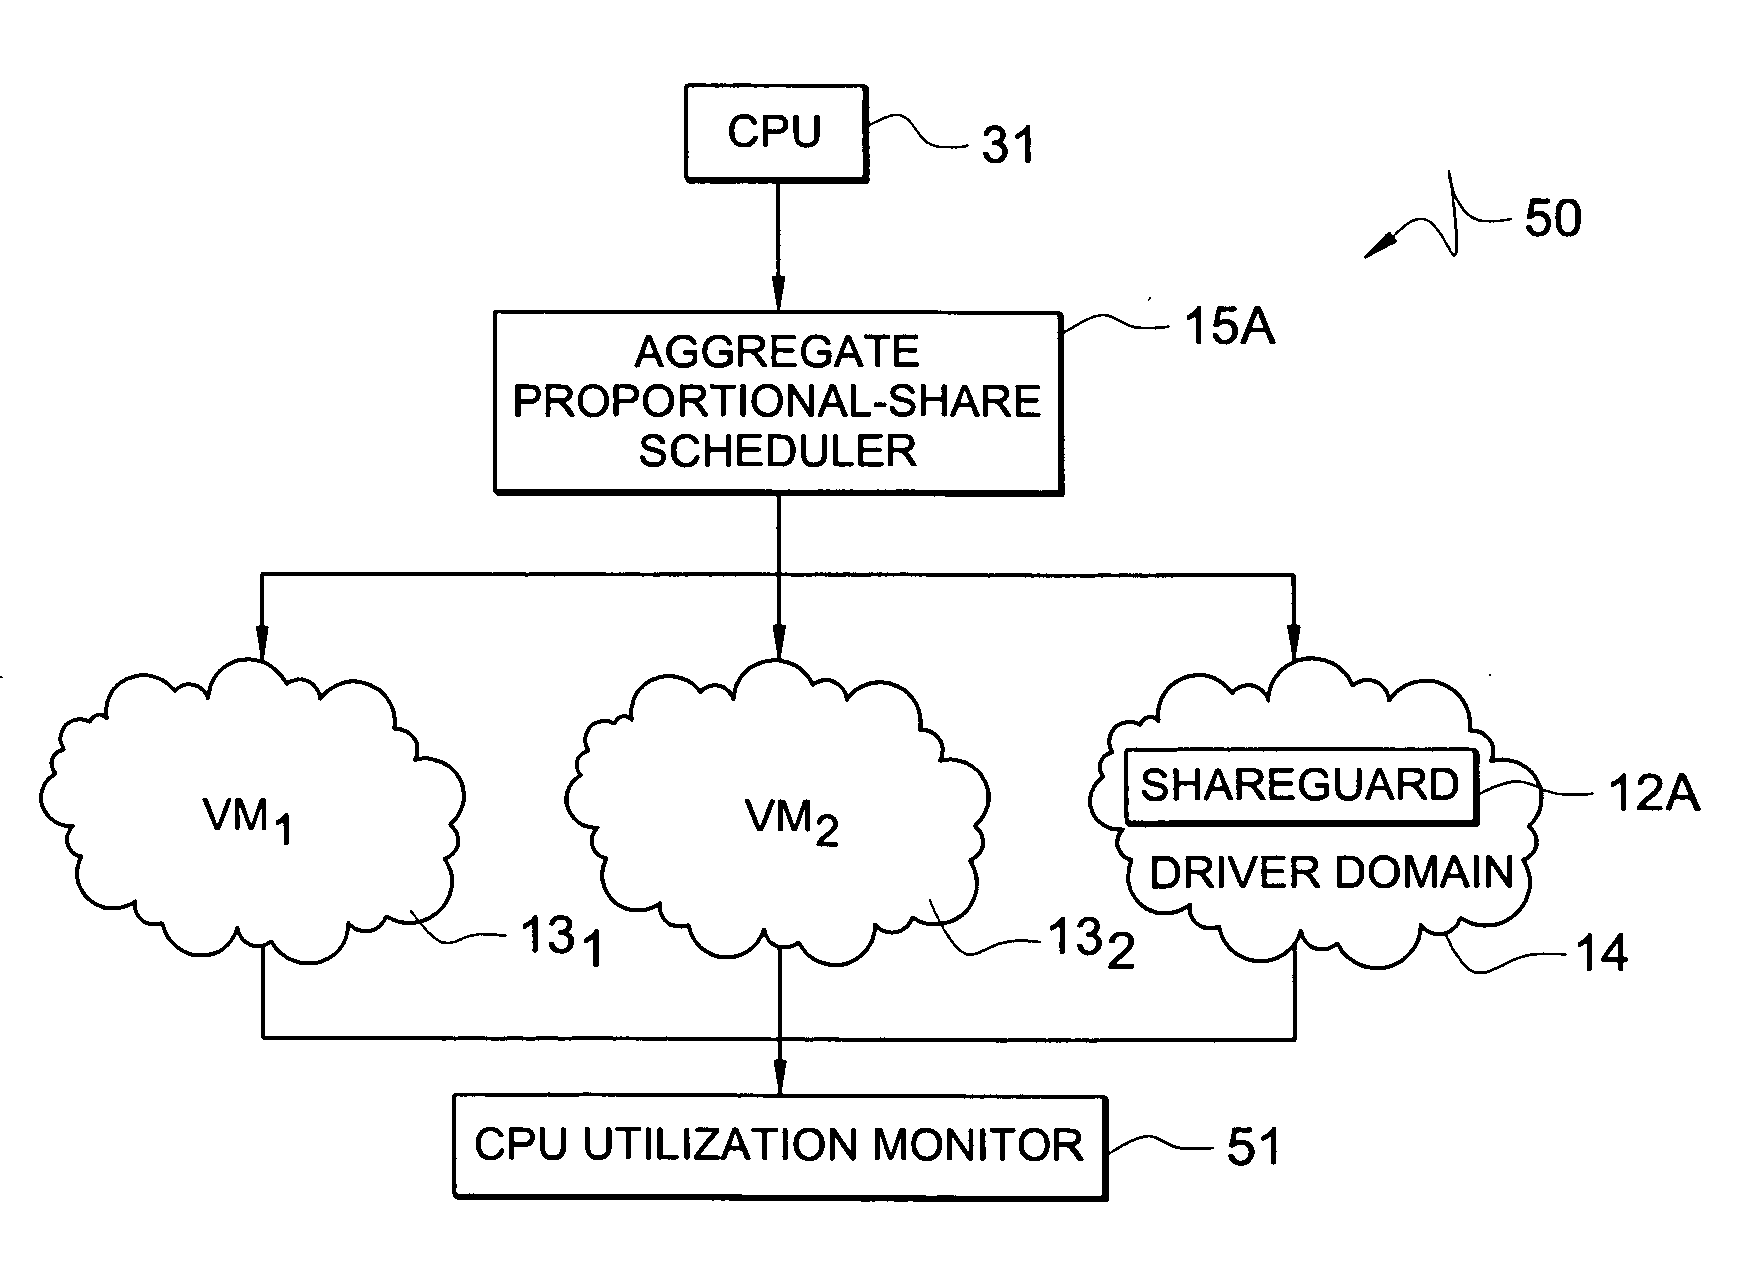 Systems and methods for controlling resource usage by a driver domain on behalf of a virtual machine